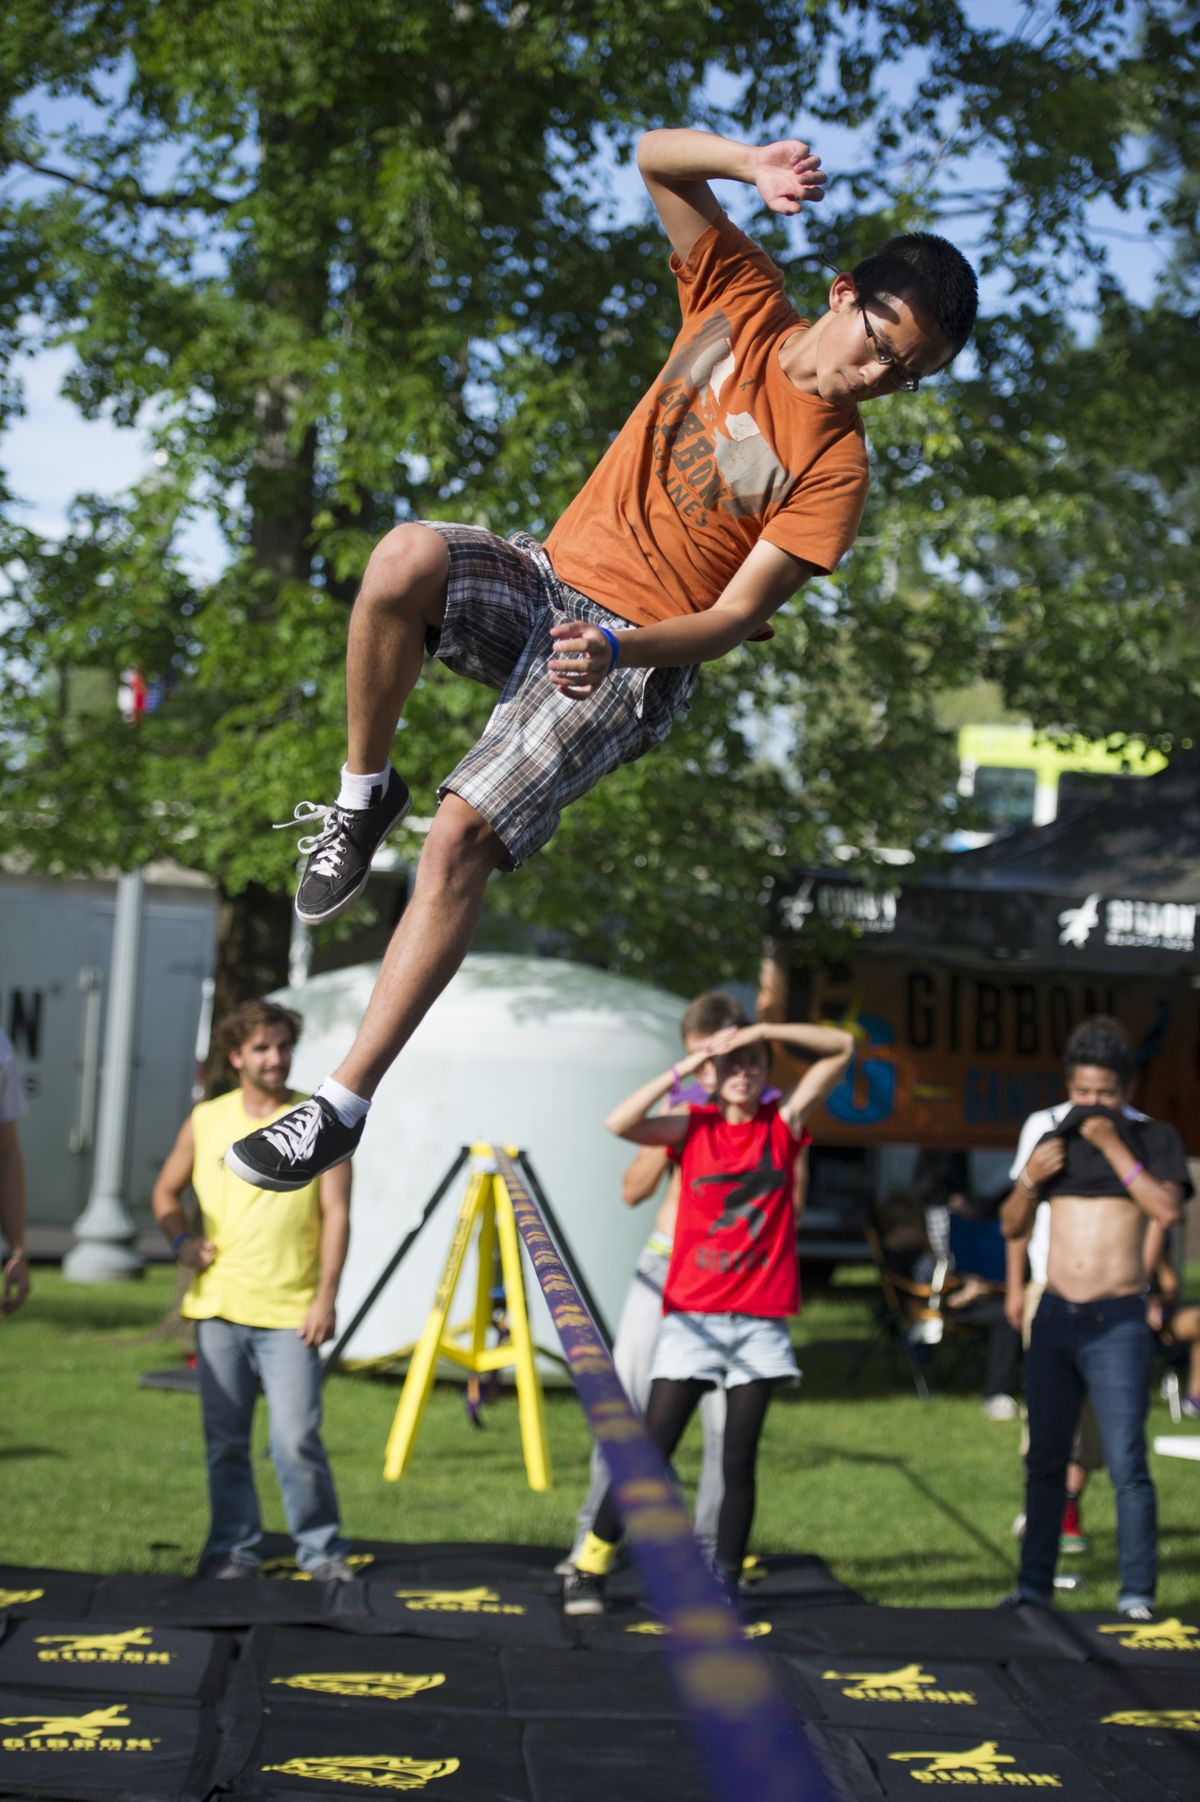 During warm-ups before the trick-run competition at the World Cup of Slacklining, Peter Chen of Fort Collins, Colo., performs a routine Thursday. The event was held during Hoopfest weekend in Riverfront Park. (Colin Mulvany)